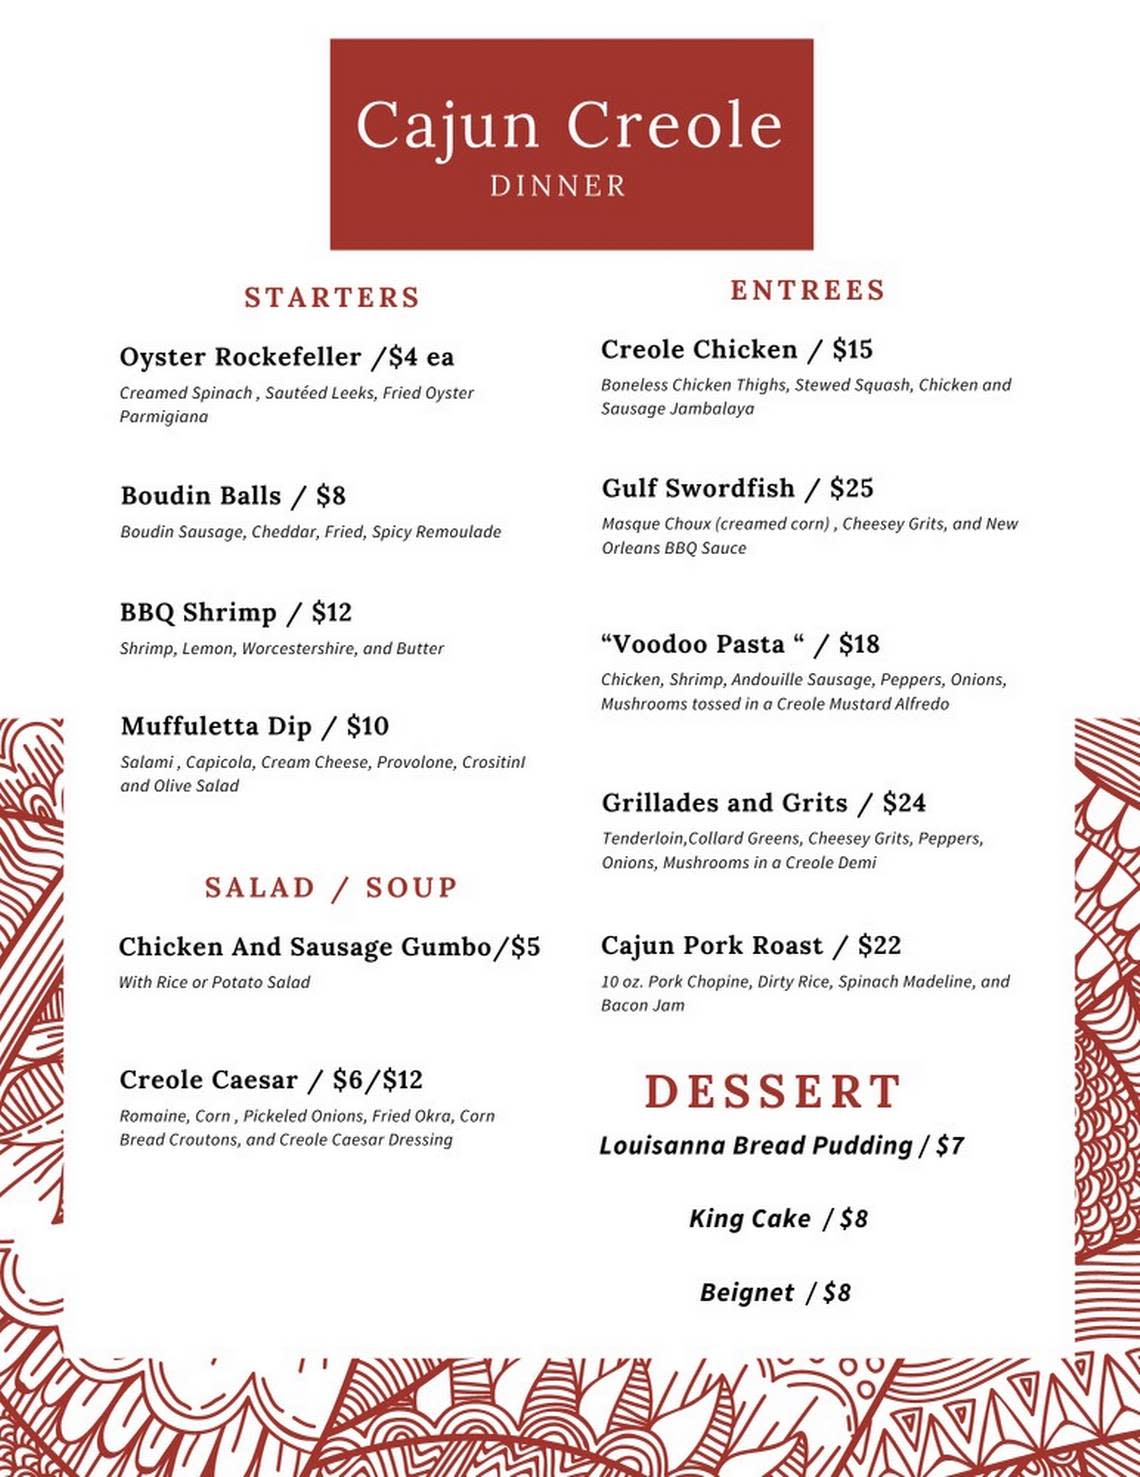 The dinner menu for Magnolia Cafe’s pop-up dinner on Saturday